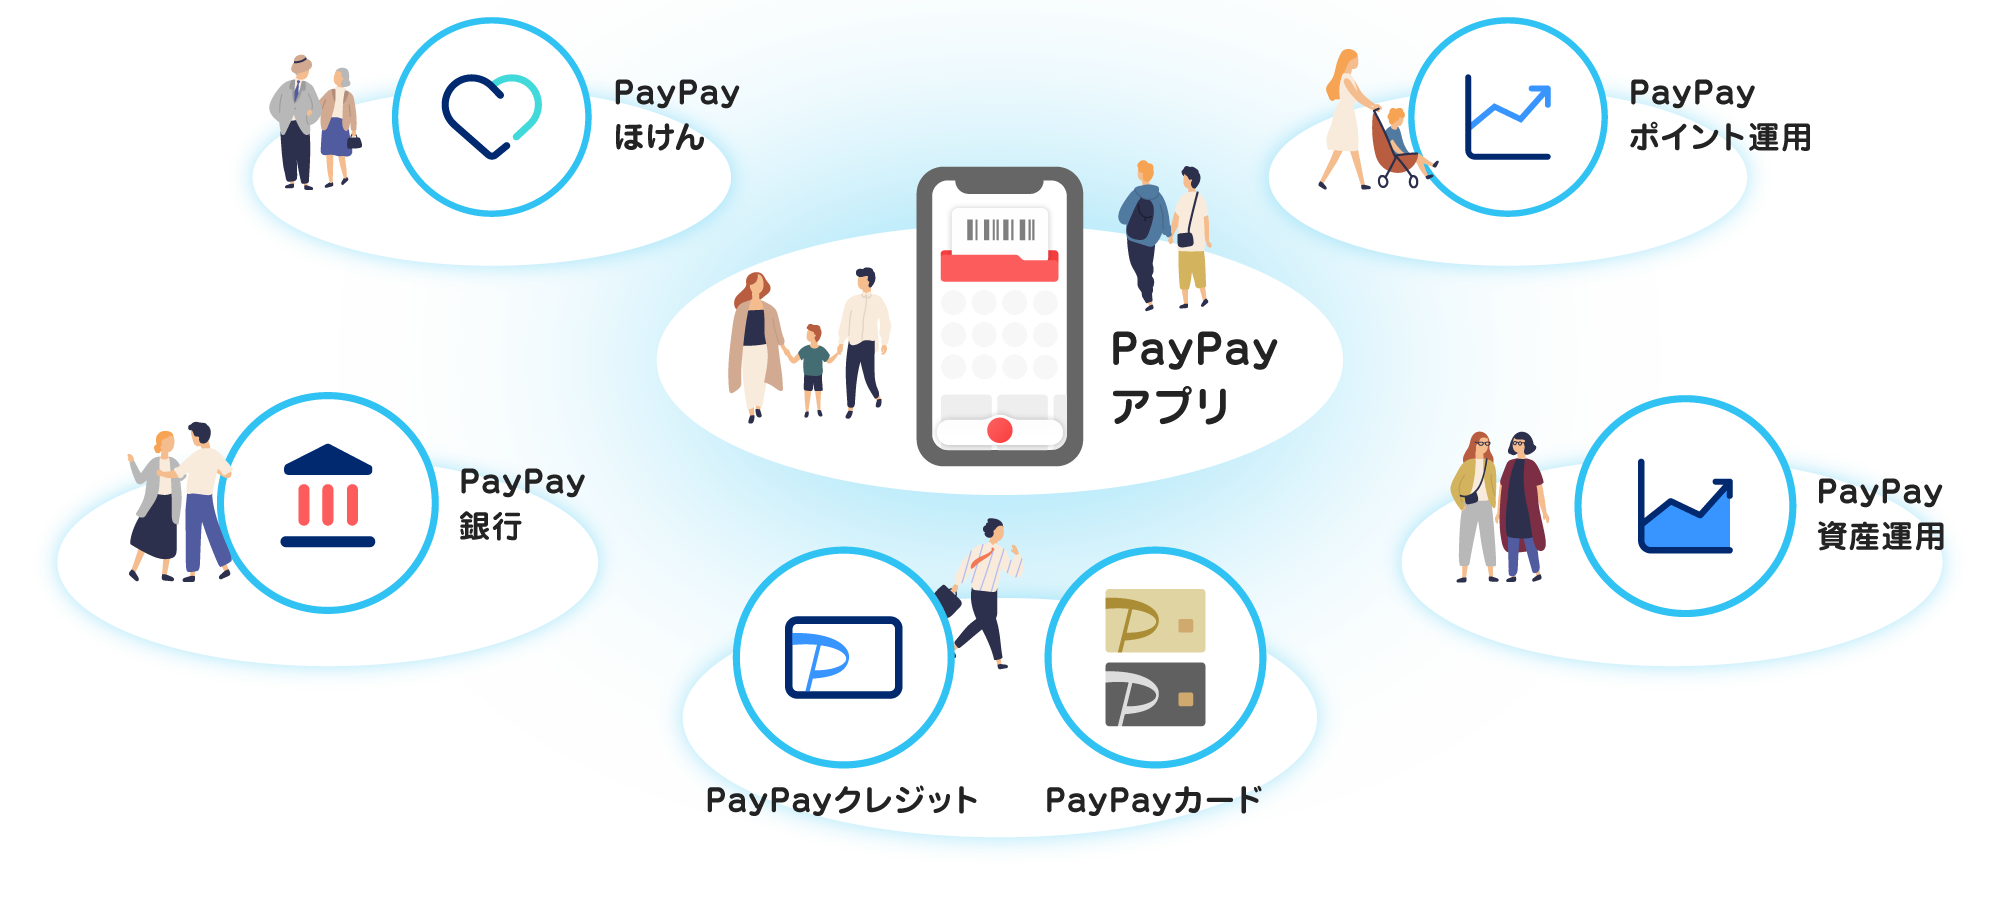 PayPayアプリ|PayPayクレジット・PayPayカード|PayPay銀行|PayPayほけん|PayPay資産運用|PayPayポイント運用